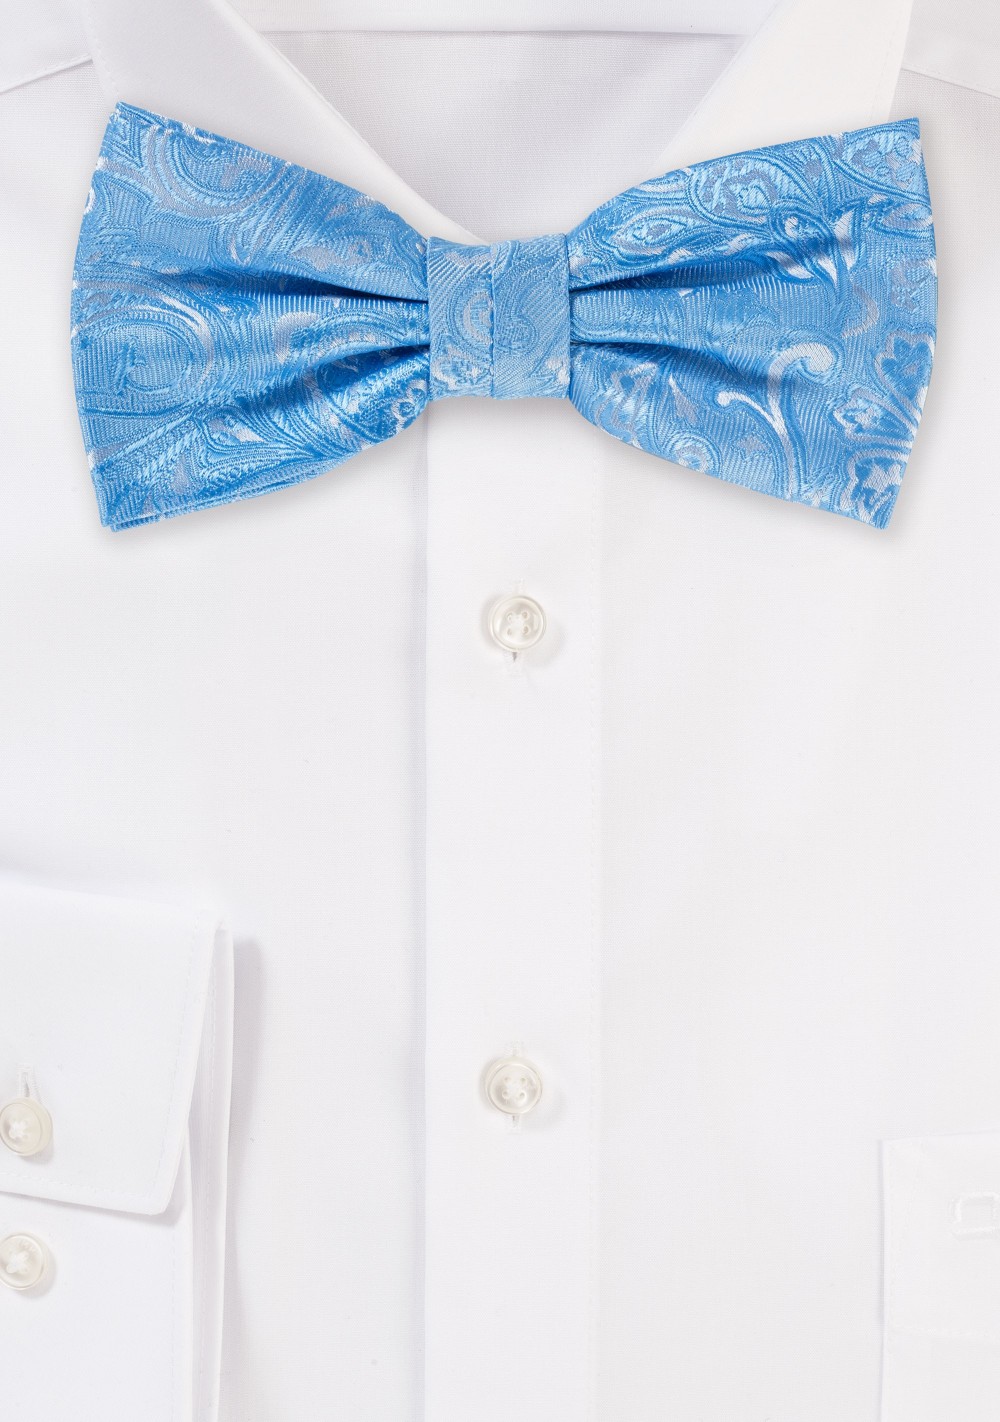 Paisley Bow Tie in Blue Jay Blue